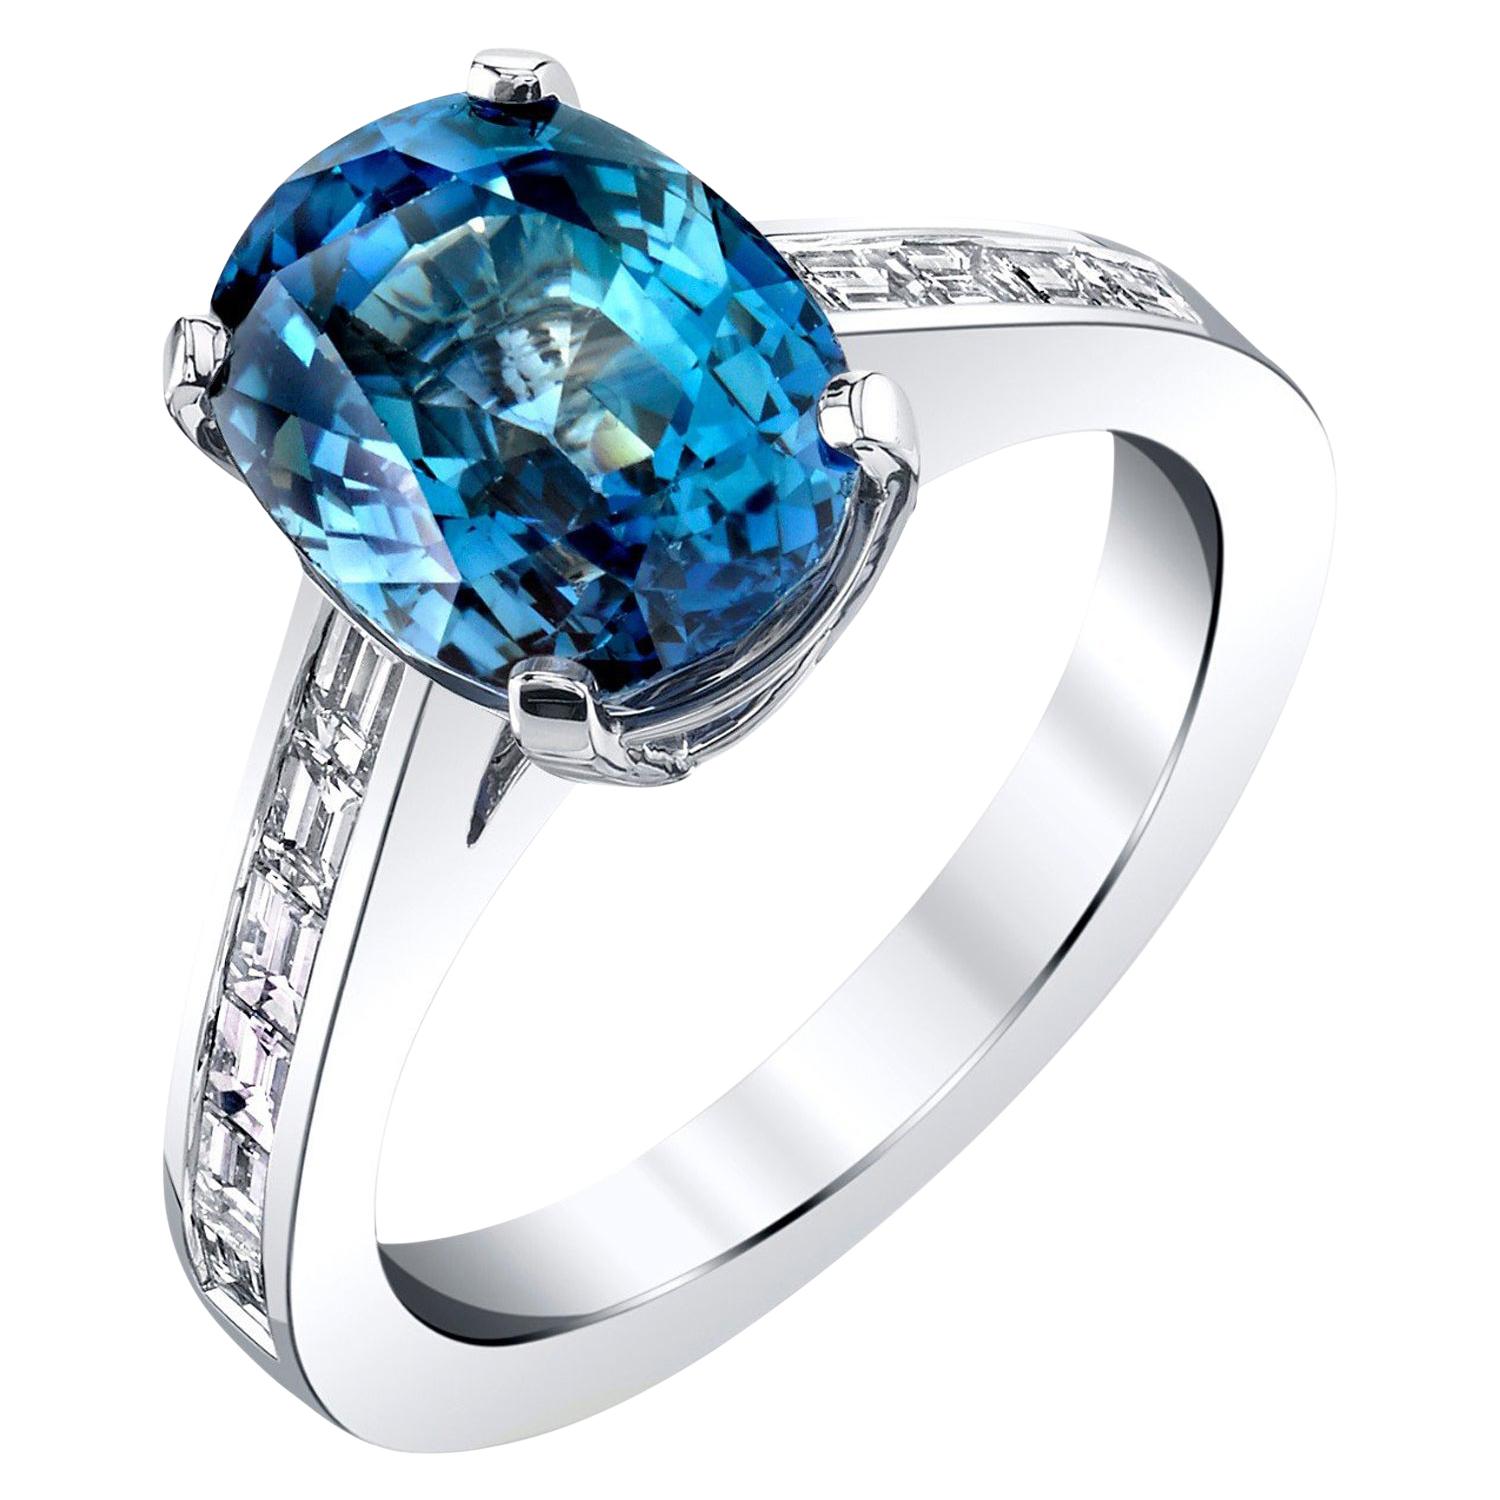 Blue Sapphire and Diamond Baguette Ring 18k White Gold